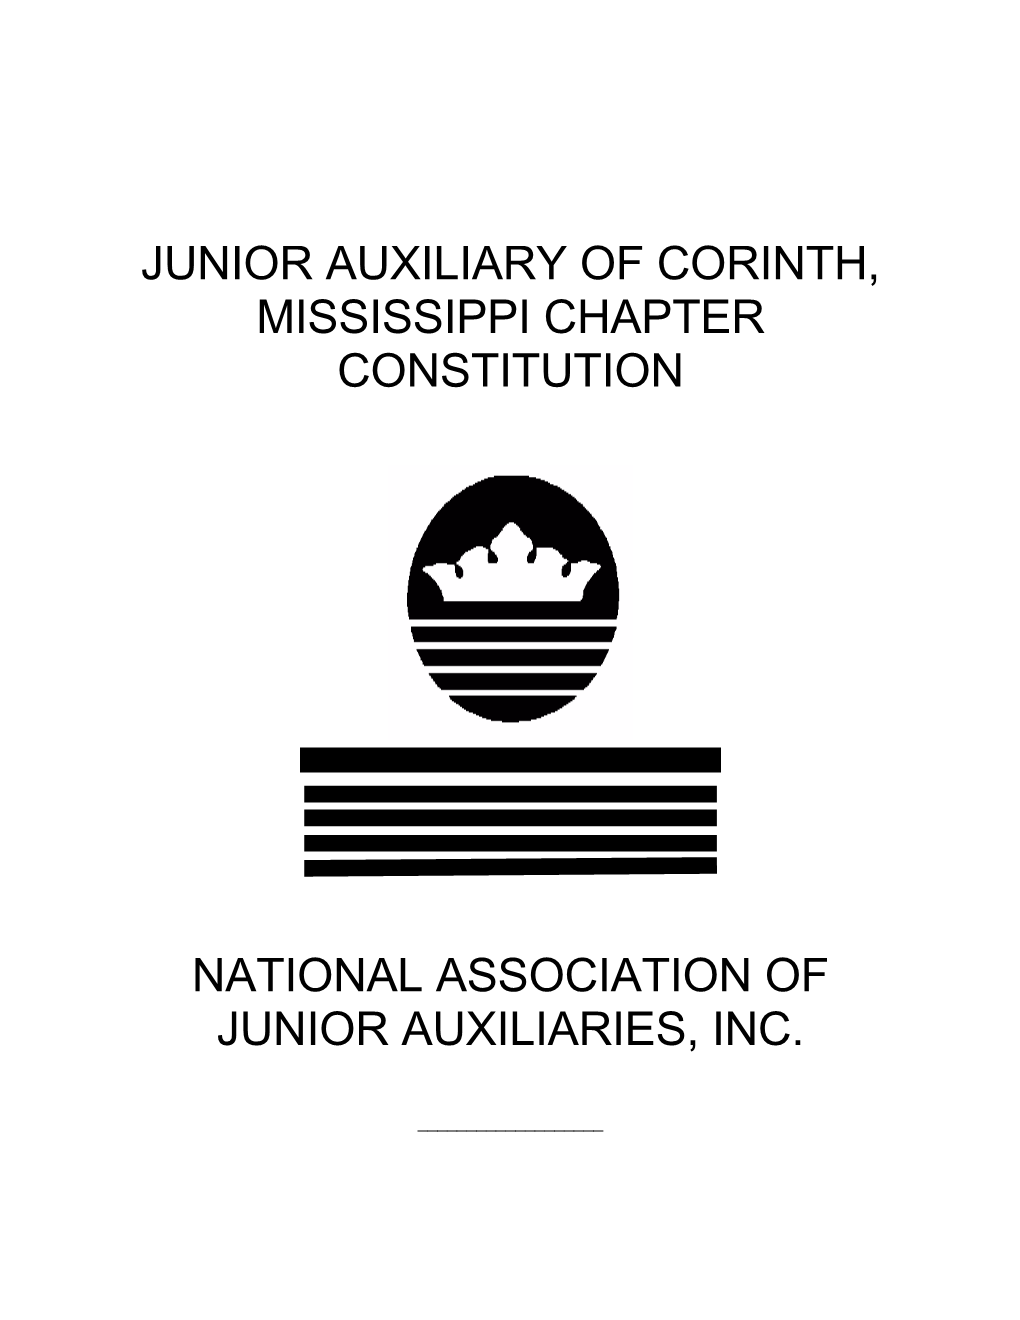 Junior Auxiliary of Corinth, Mississippi Chapter